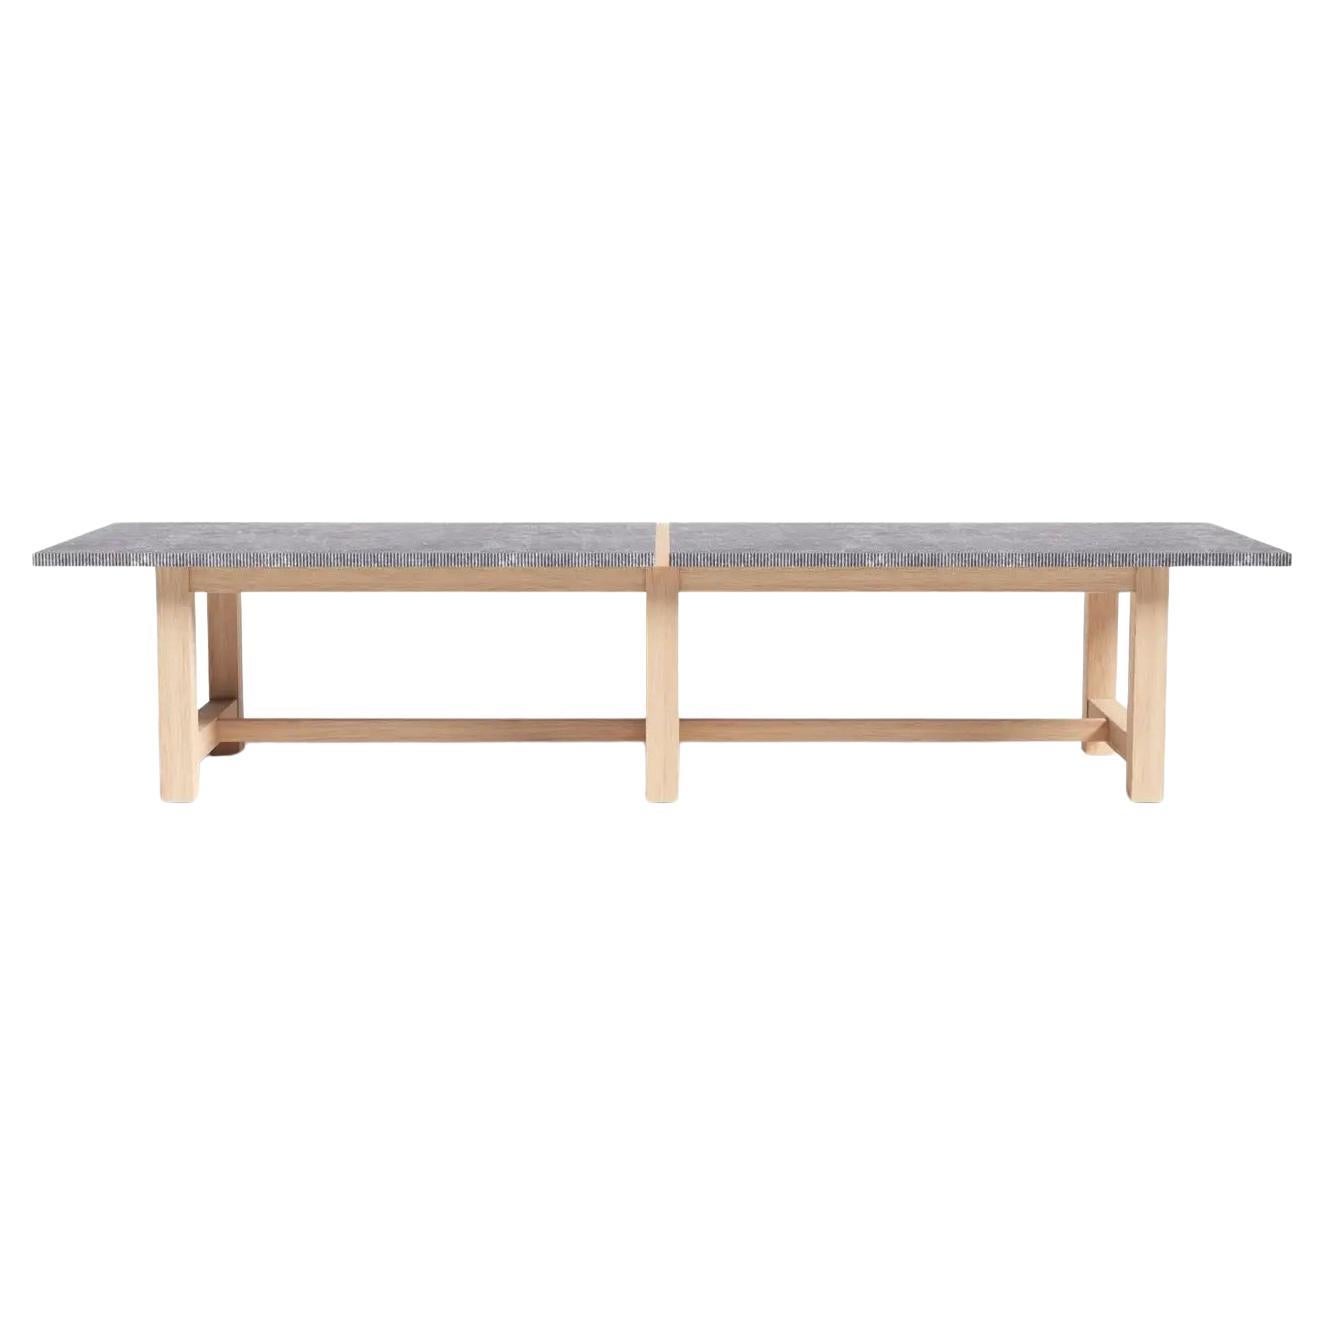 IN STOCK, READY TO SHIP.
This stunning outdoor/indoor table is made with a Belgian Bluestone top fixed over a solid French oak frame.. This strong table is handmade of long-lasting oak. A table to grow old with and share stories around. It stands